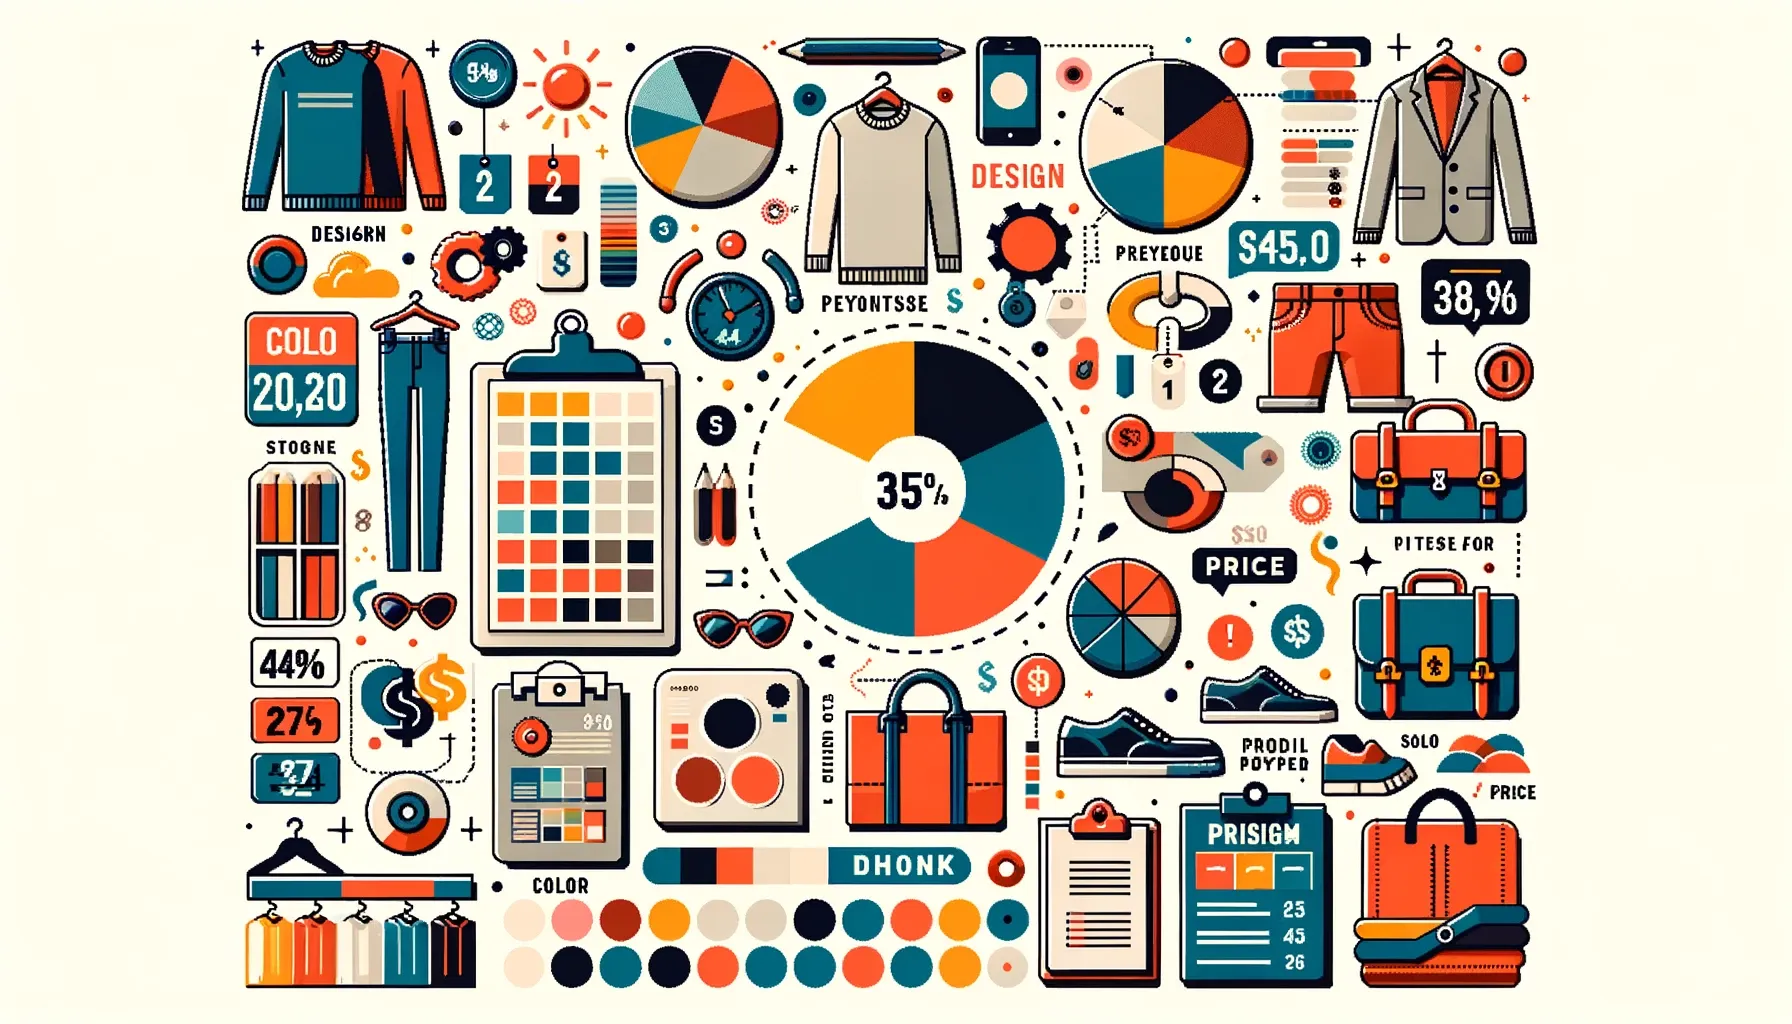 Vector infographic showcasing various clothing items&#44; color swatches&#44; and price tags&#44; highlighting the elements of design&#44; color&#44; and price in a shopping context.